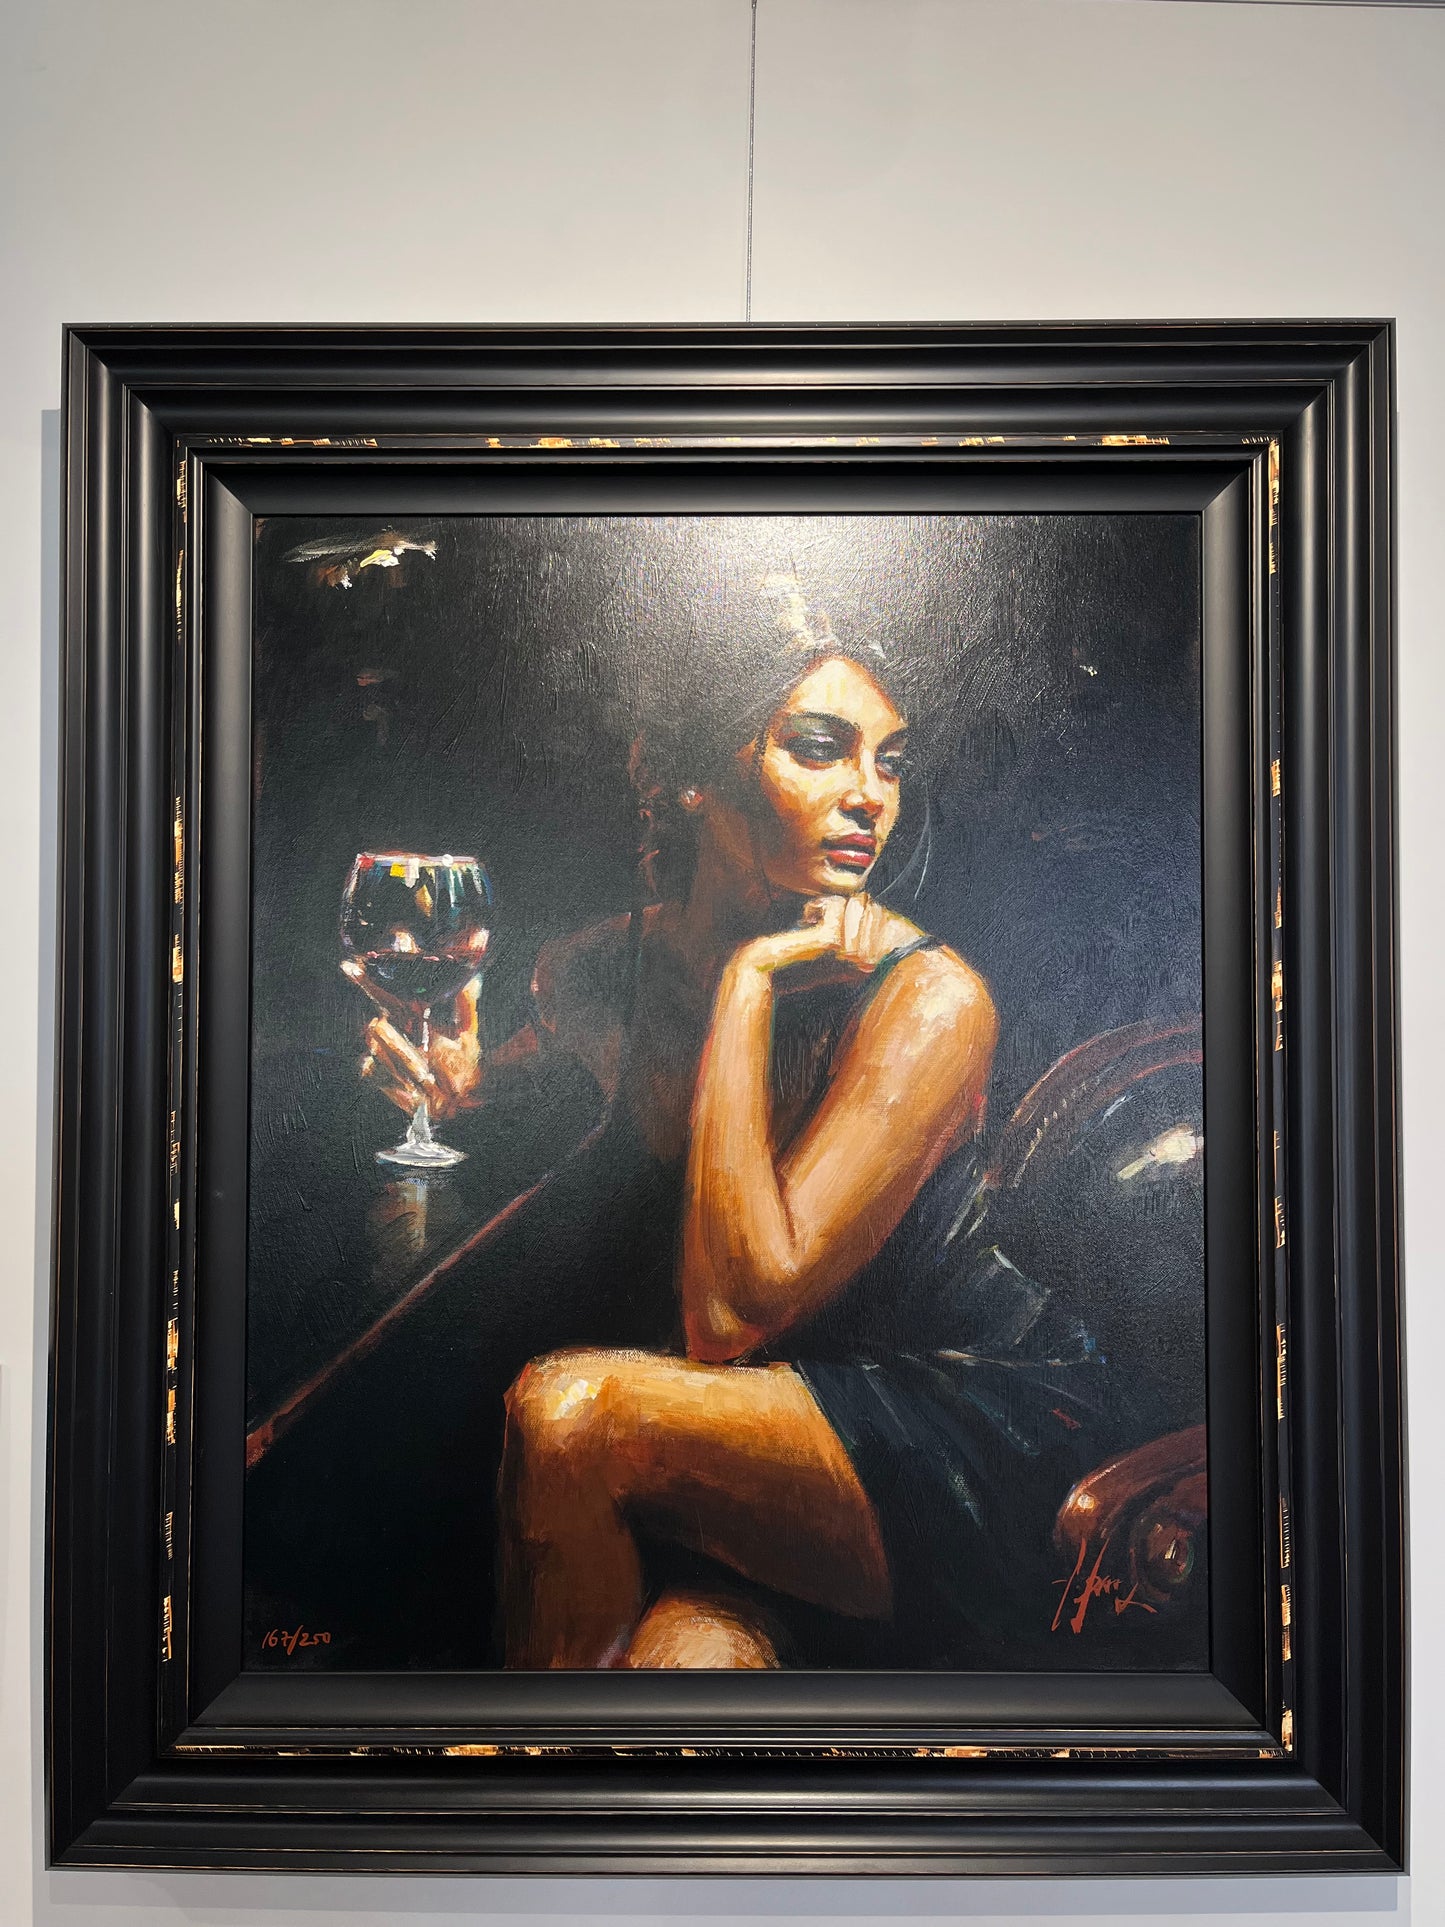 Saba with Glass of Red Wine US Edition by Fabian Perez